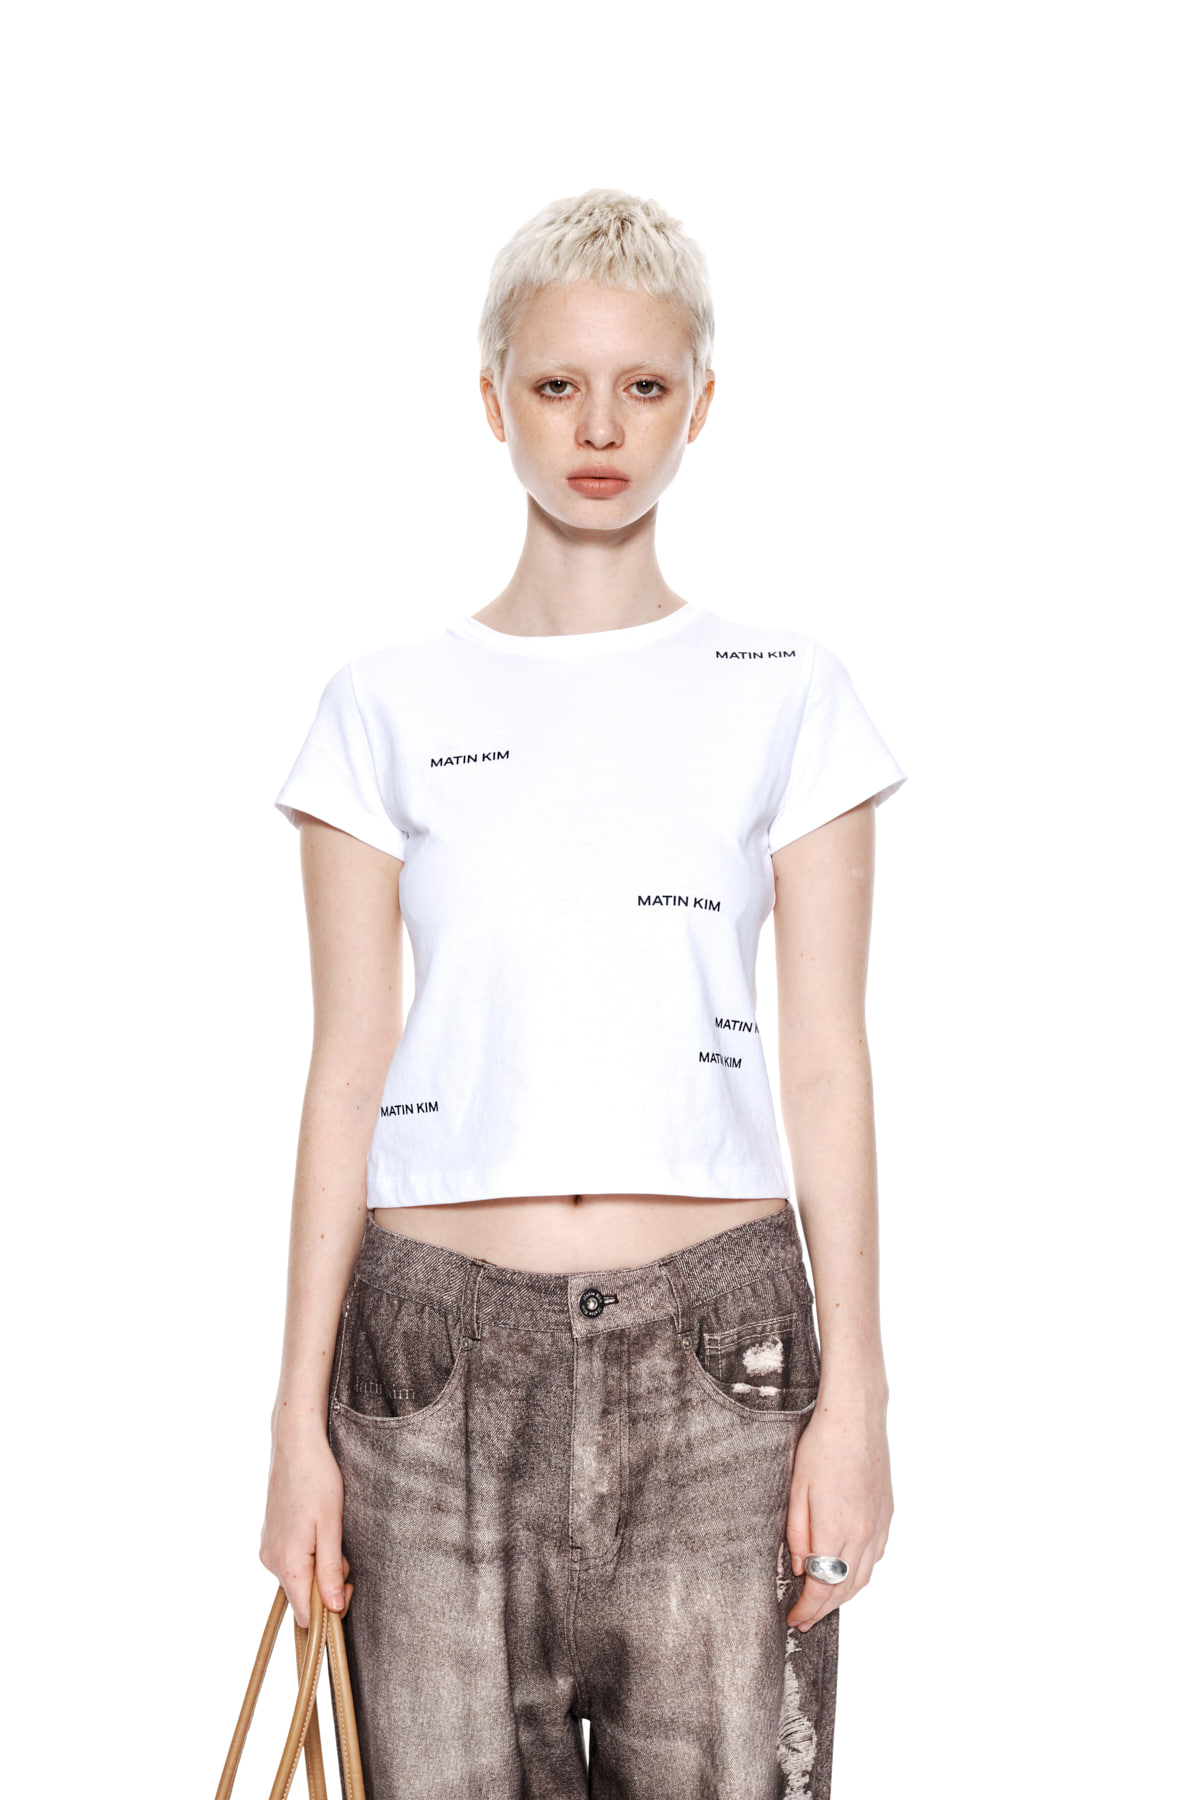 MATIN SMALL LOGO CROP TOP IN WHITE